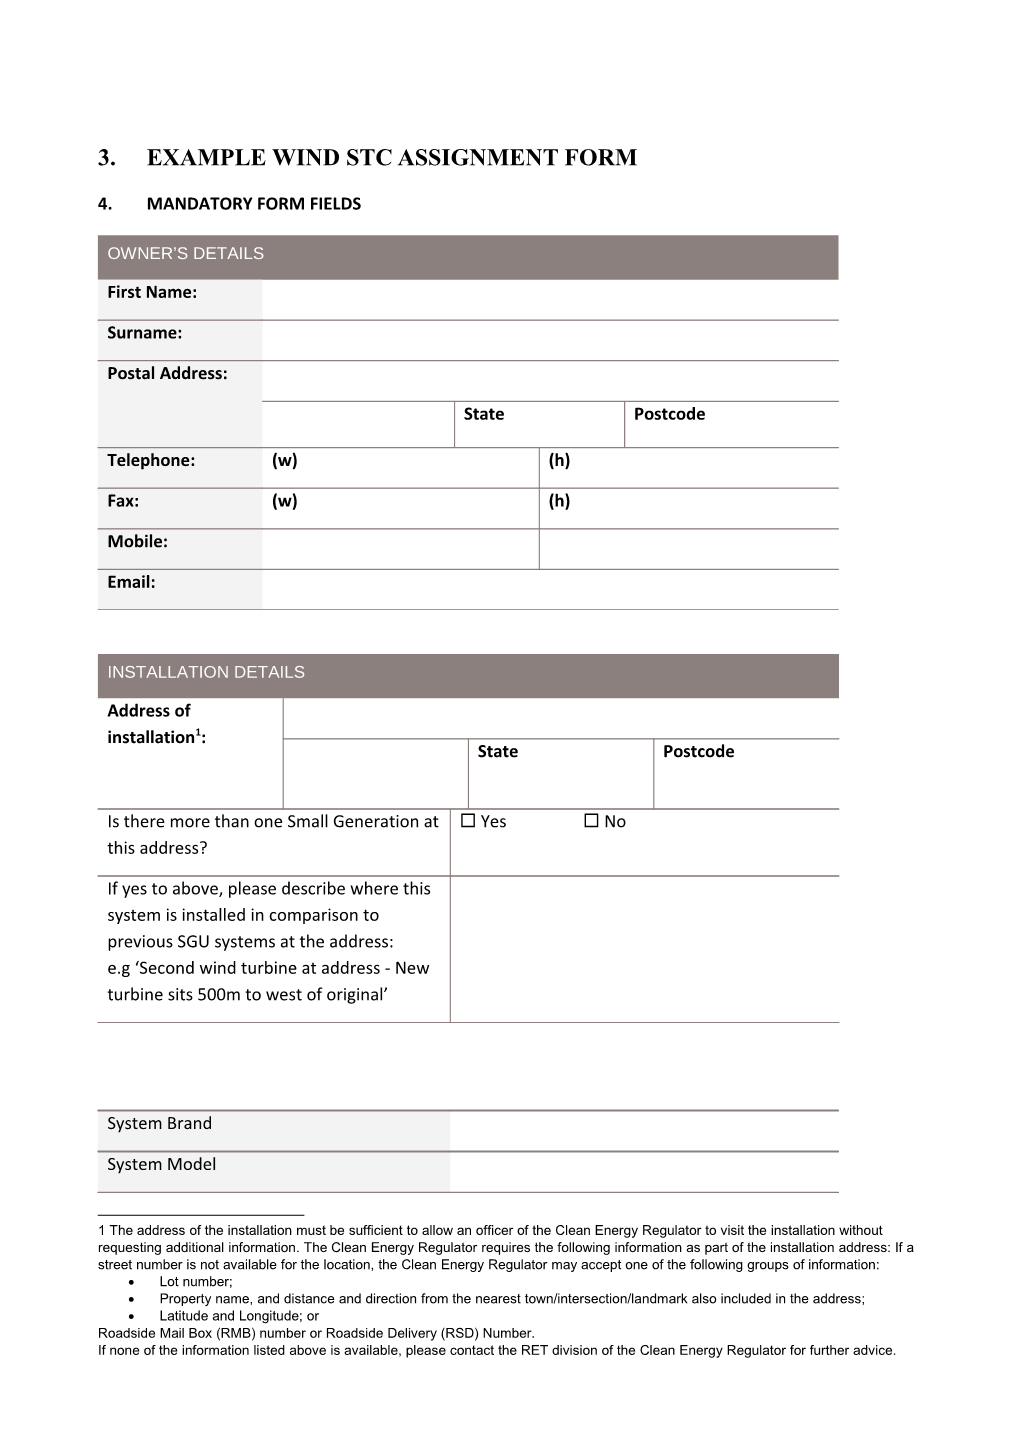 STC Assignment Form Template - Wind